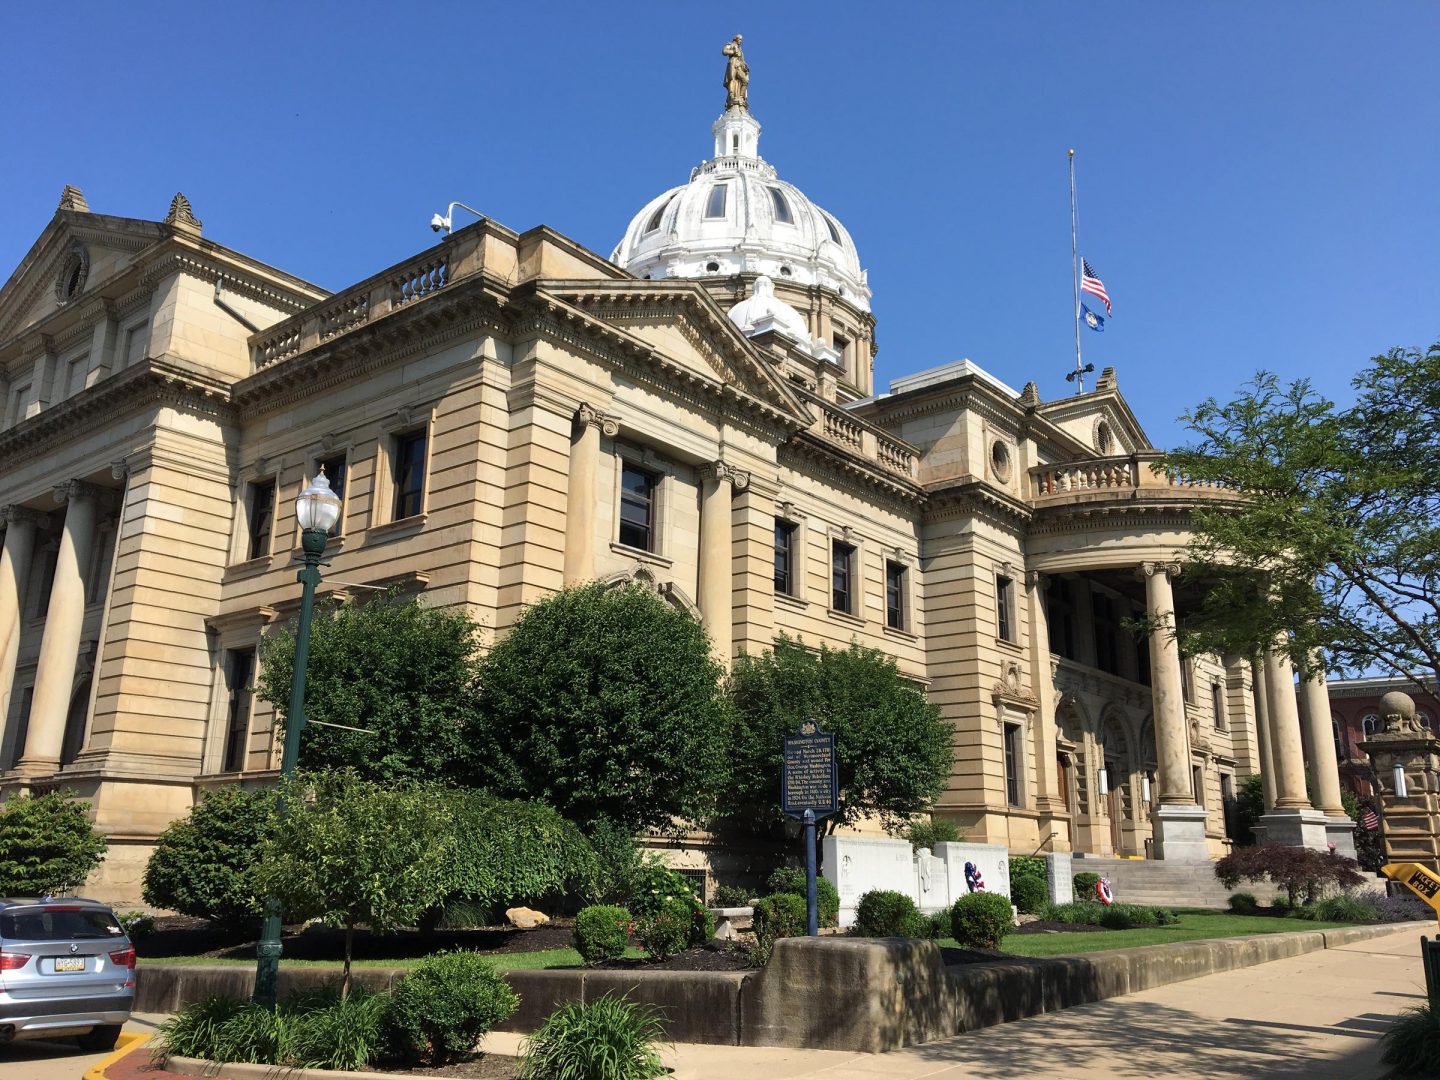 The exterior of the Washington County courthouse.